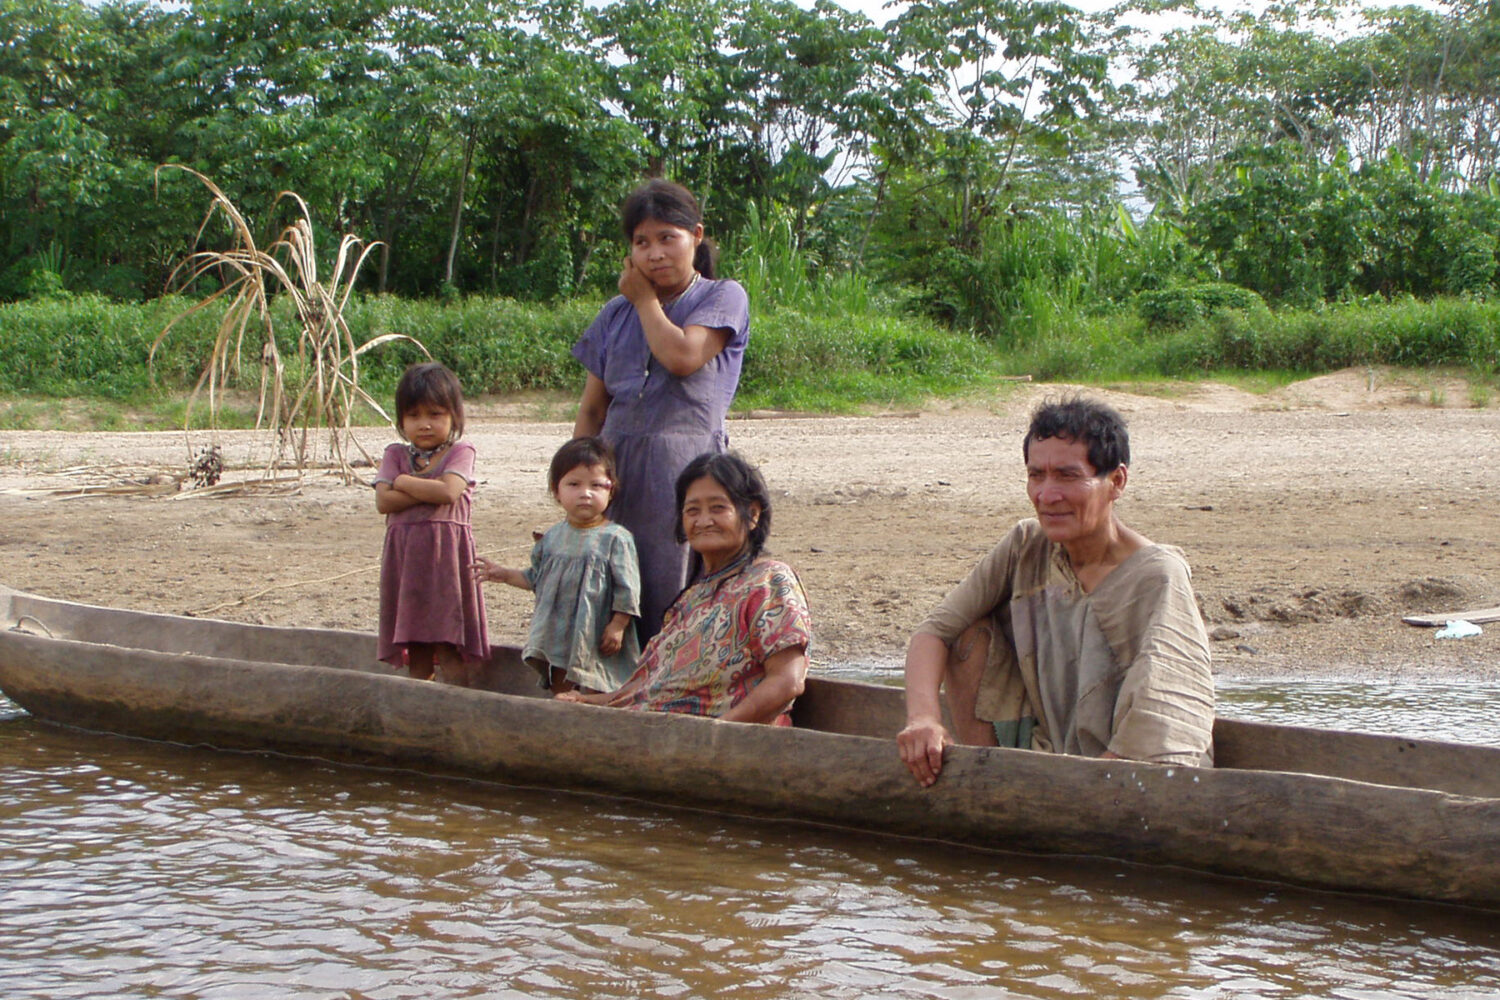 Some of the World’s Lowest Dementia Rates are Found in Amazonian Indigenous Groups